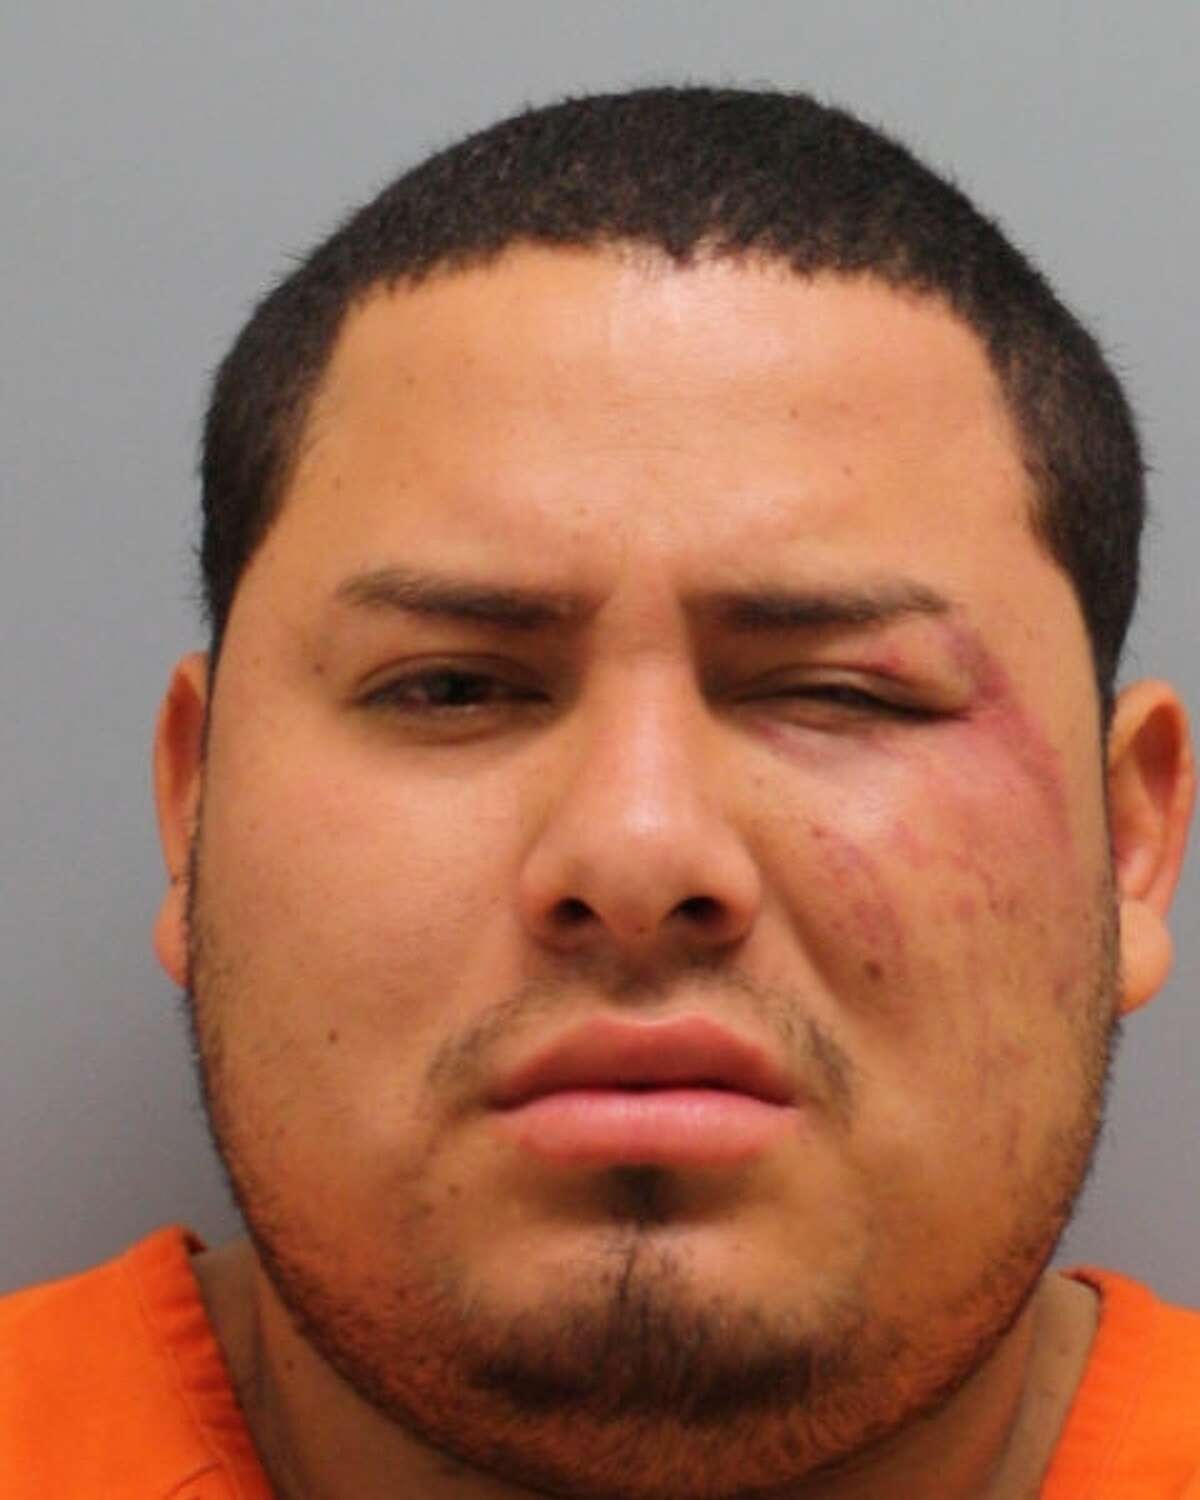 Eric DeLuna is one of four people charged with capital murder for the death of Lawrence Chapa, who was slain in 2011.